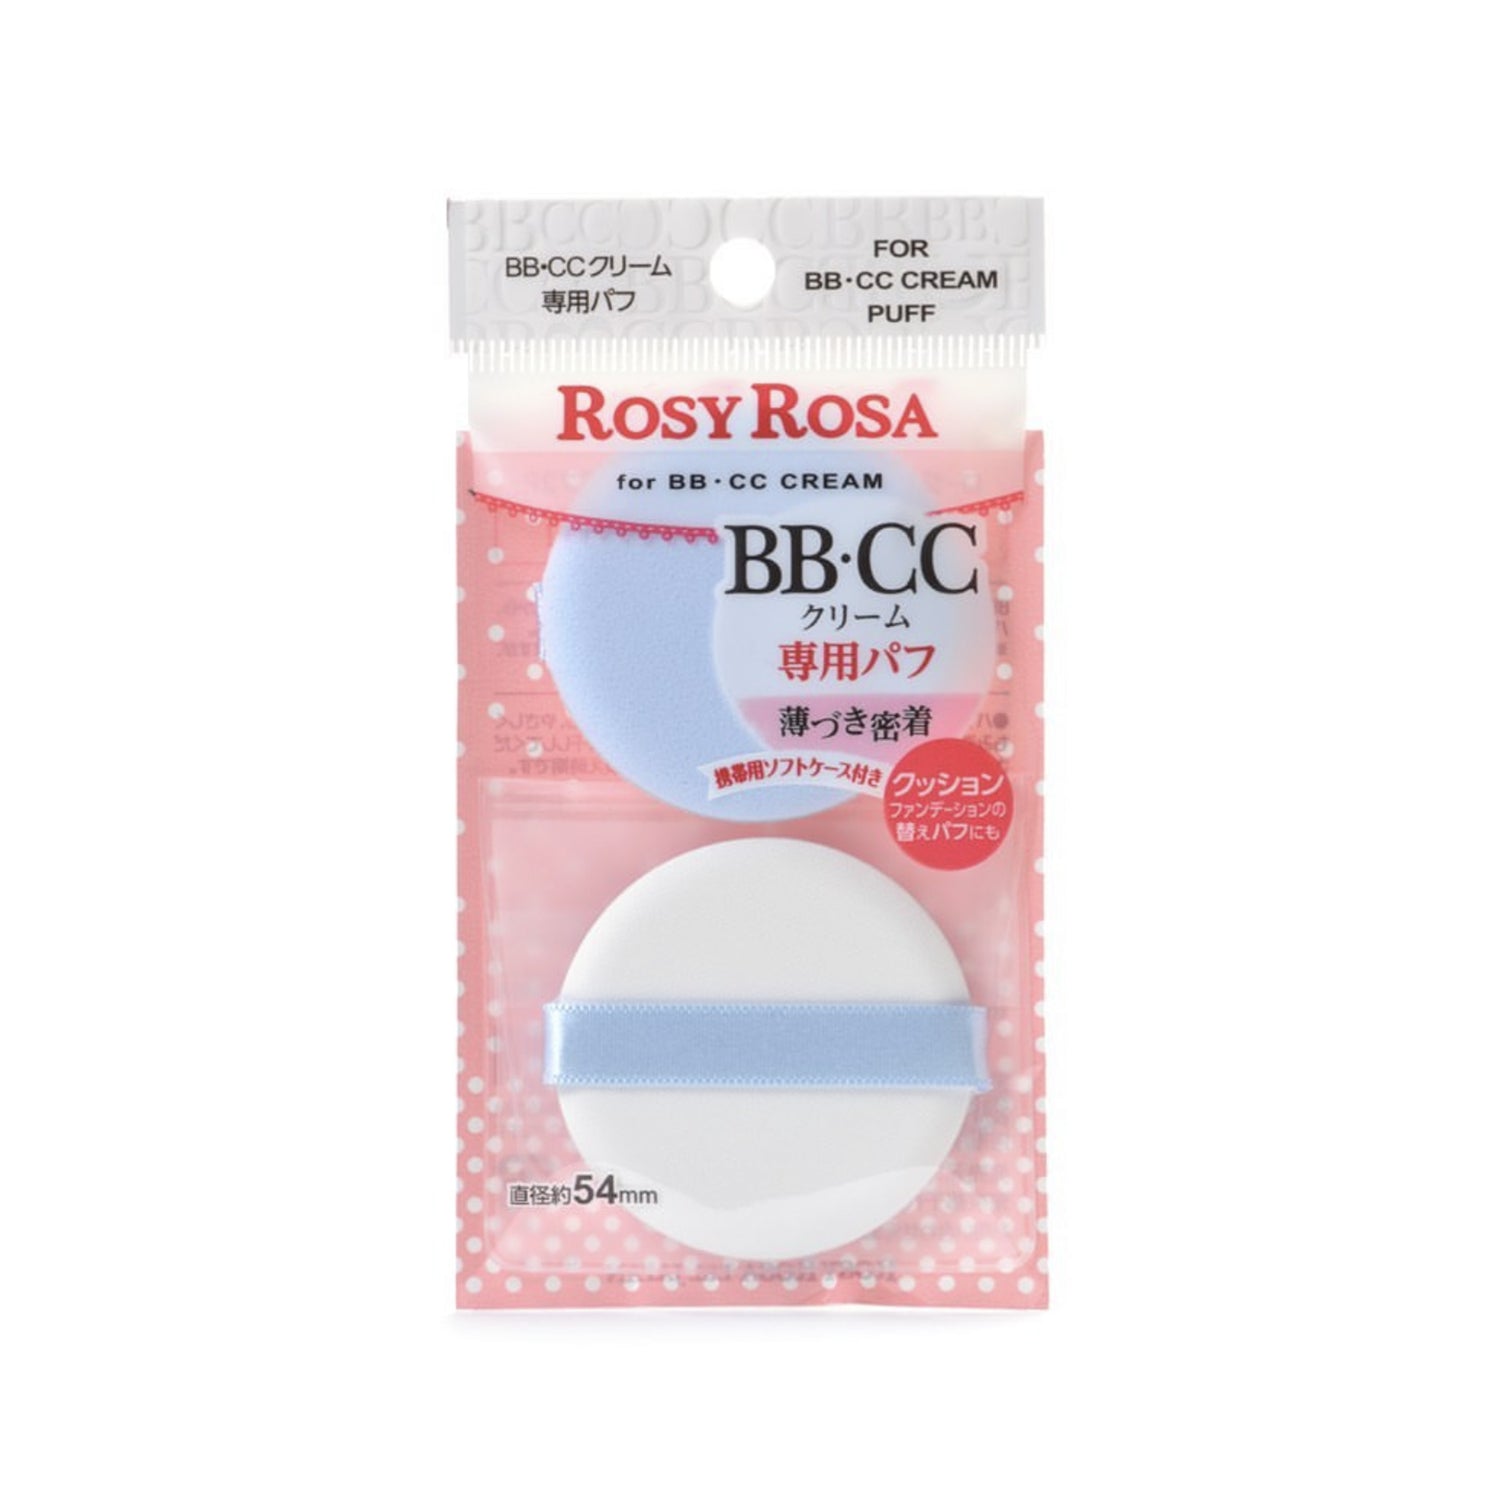 ROSY ROSA Make Up Puff For BB/CC Cream